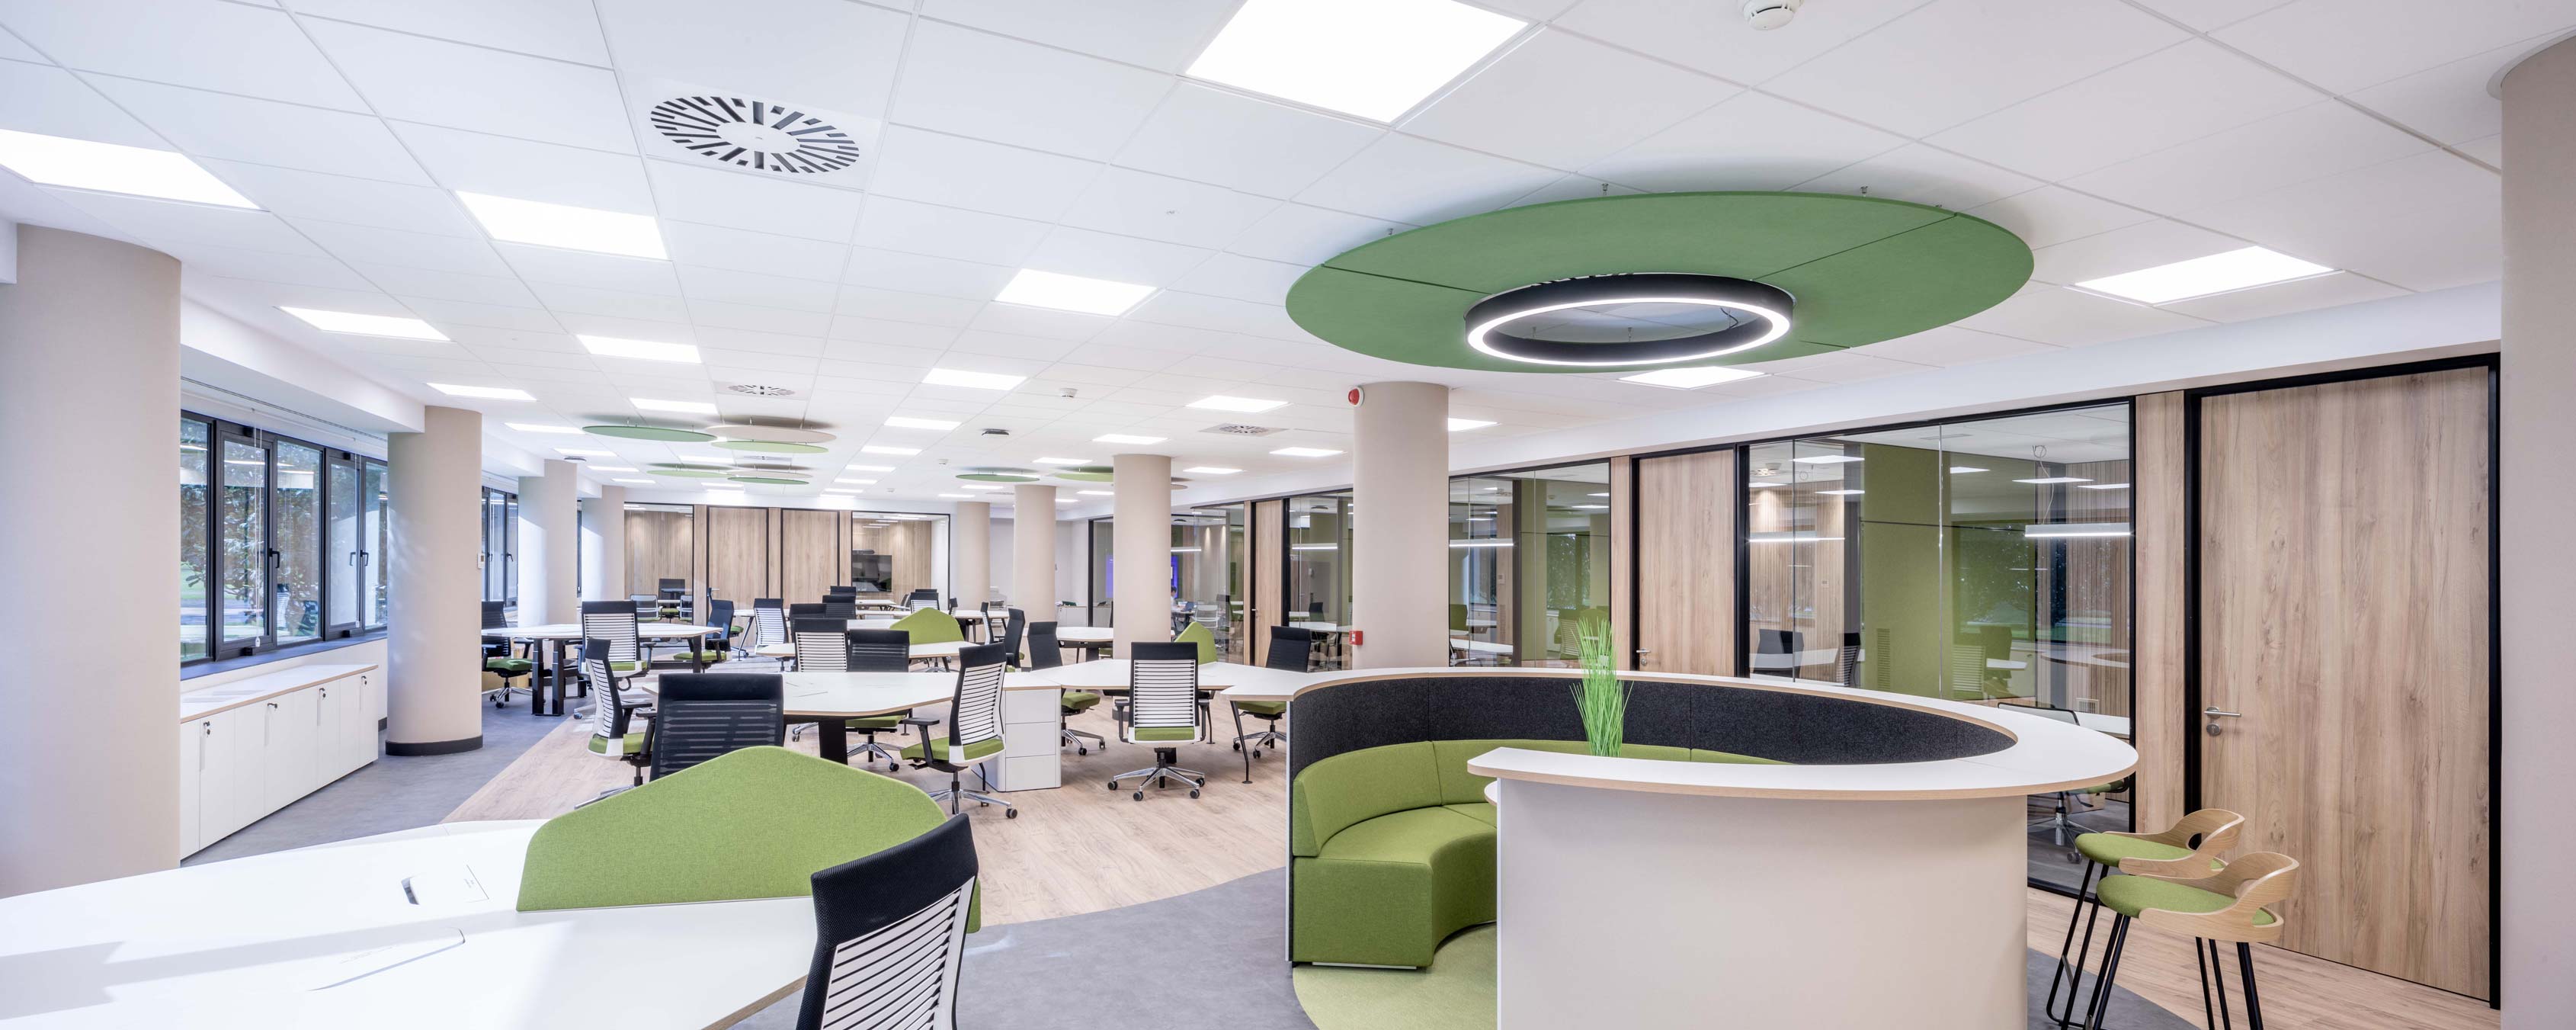 Dynamobel and Amencorner create a new office for a major pharmaceutical company